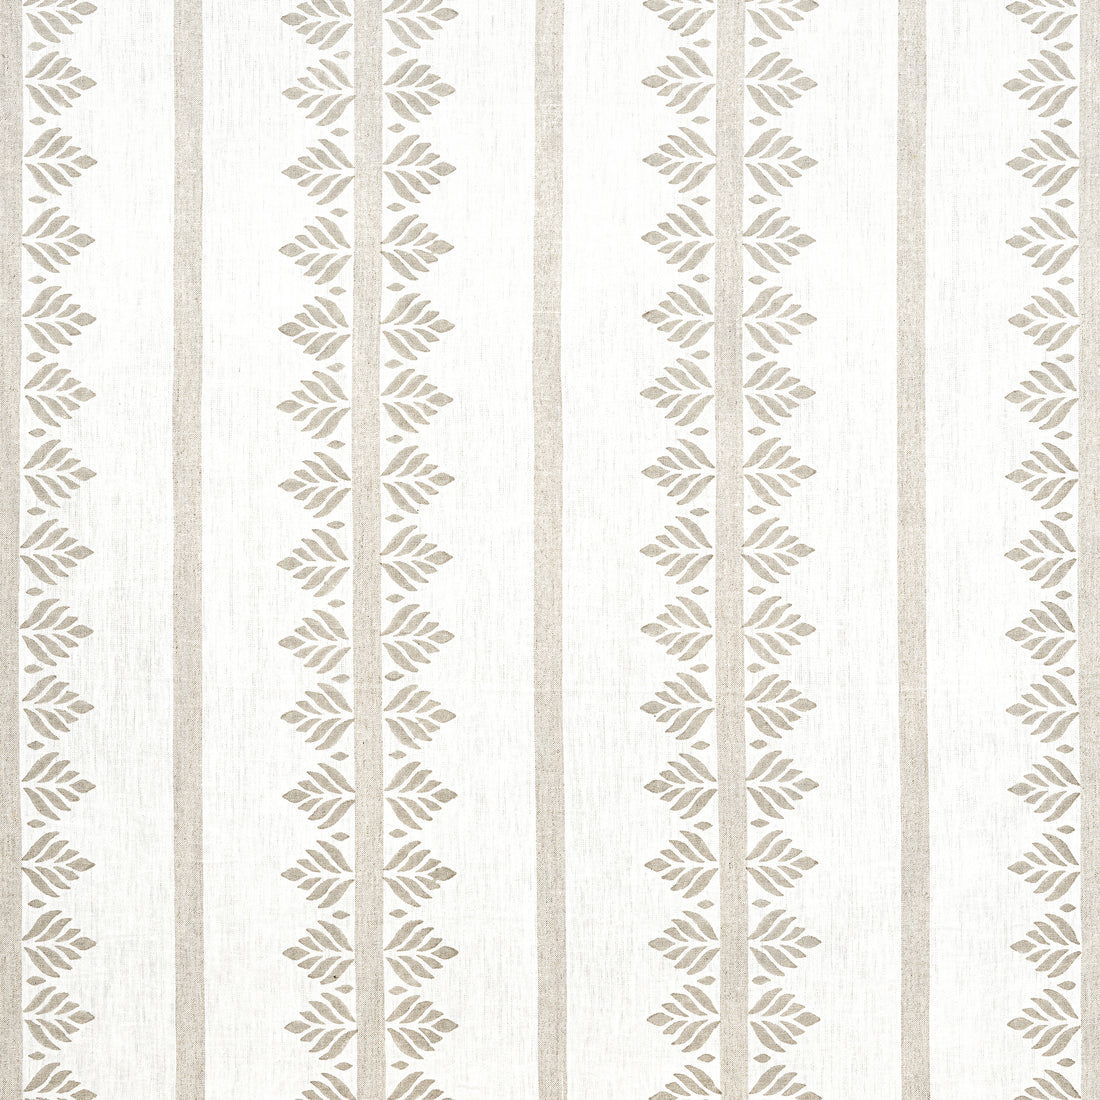 Fern Stripe fabric in beige color - pattern number AF15104 - by Anna French in the Antilles collection